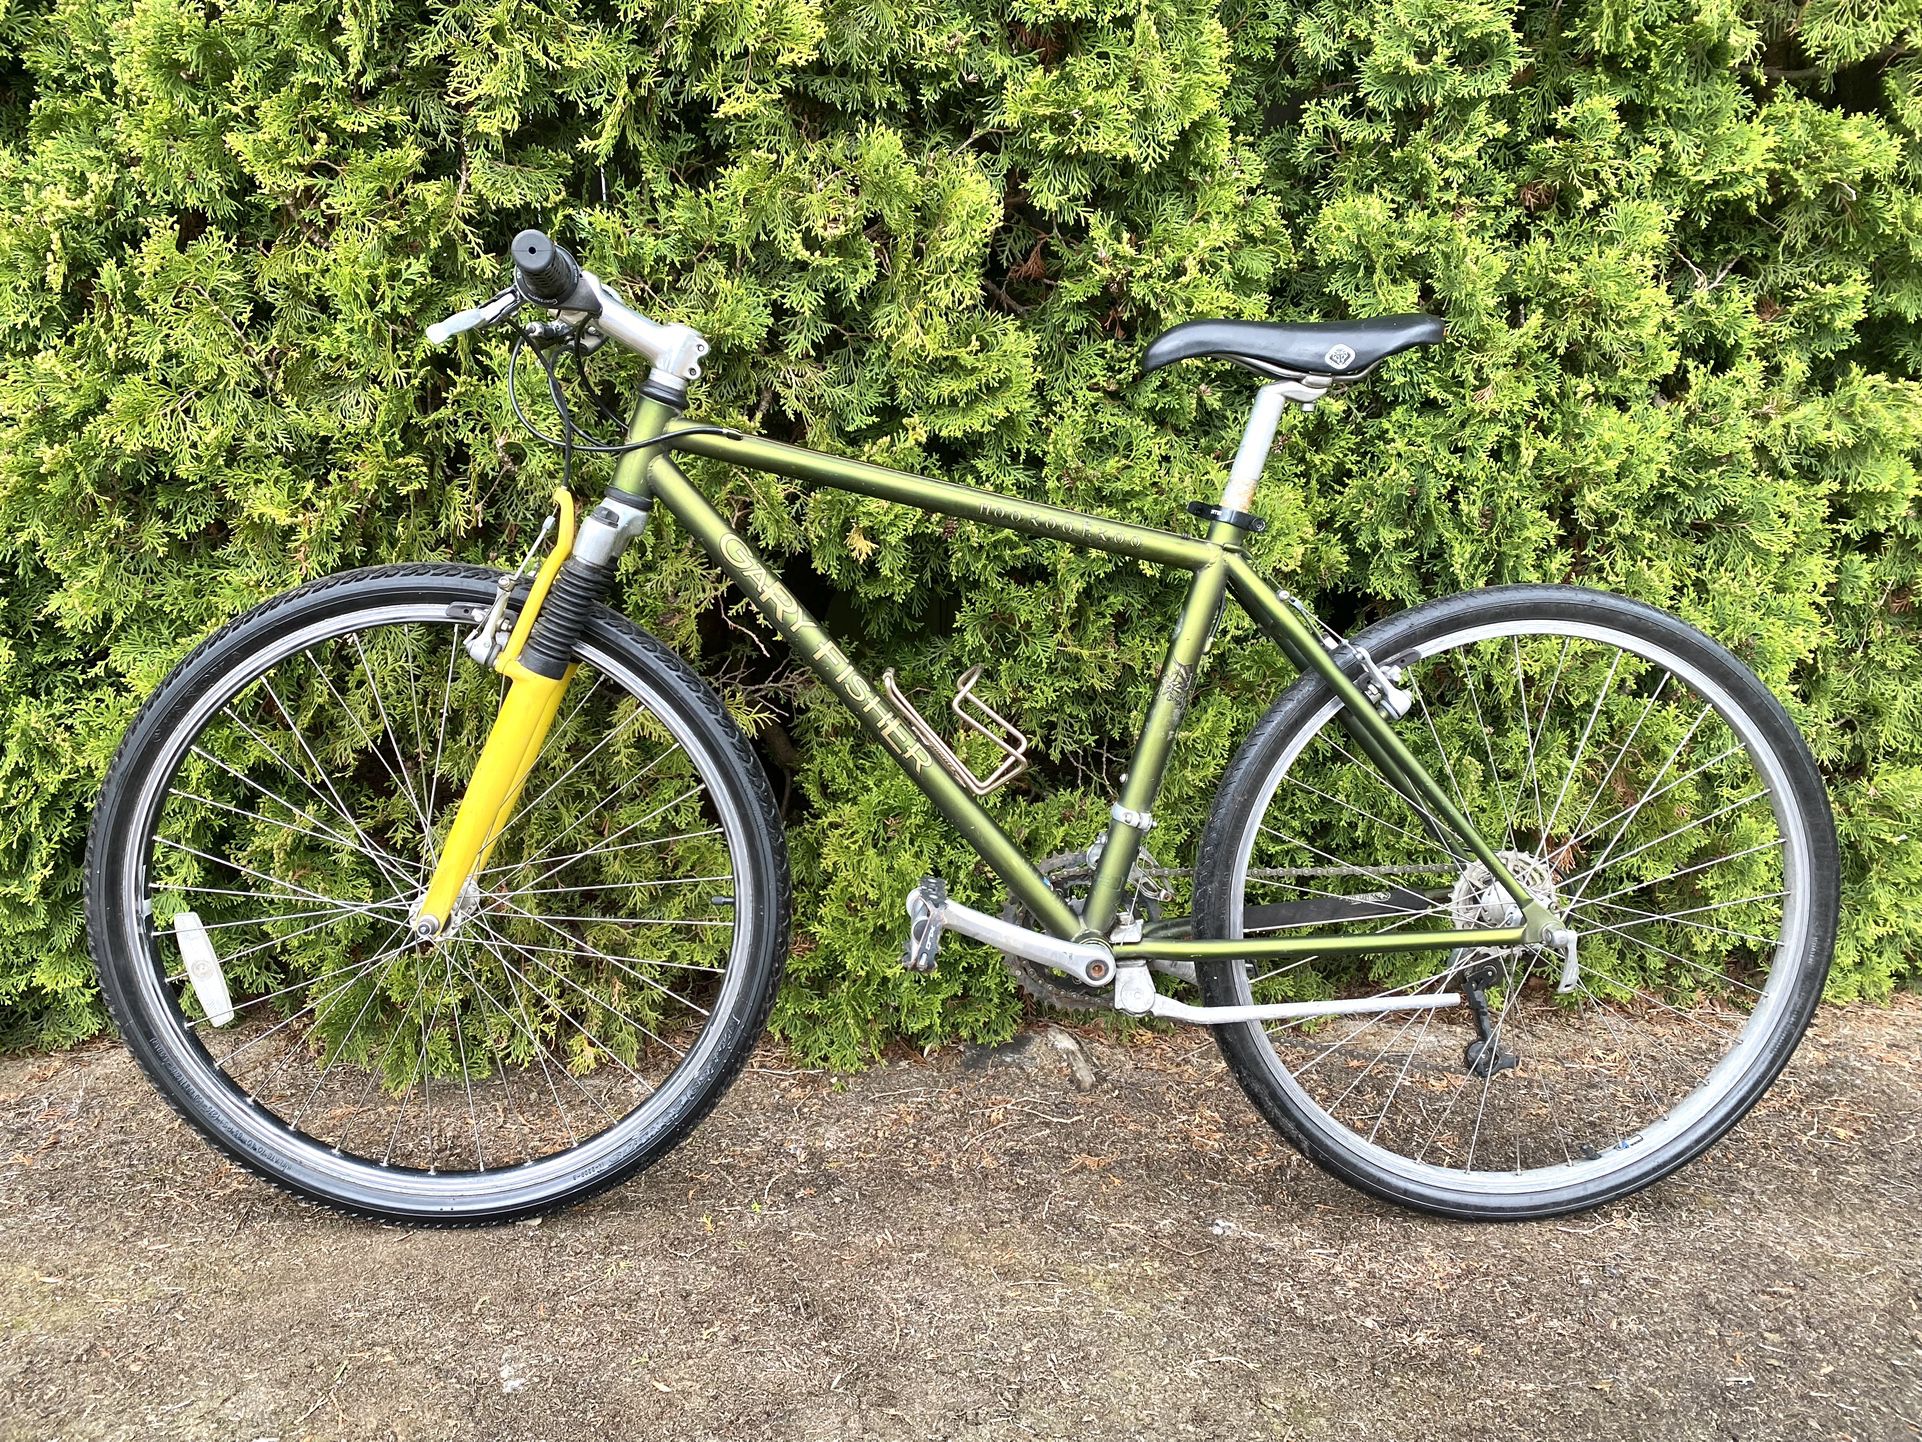 Small Gary Fisher Mtn Bike (Needs New Cables)